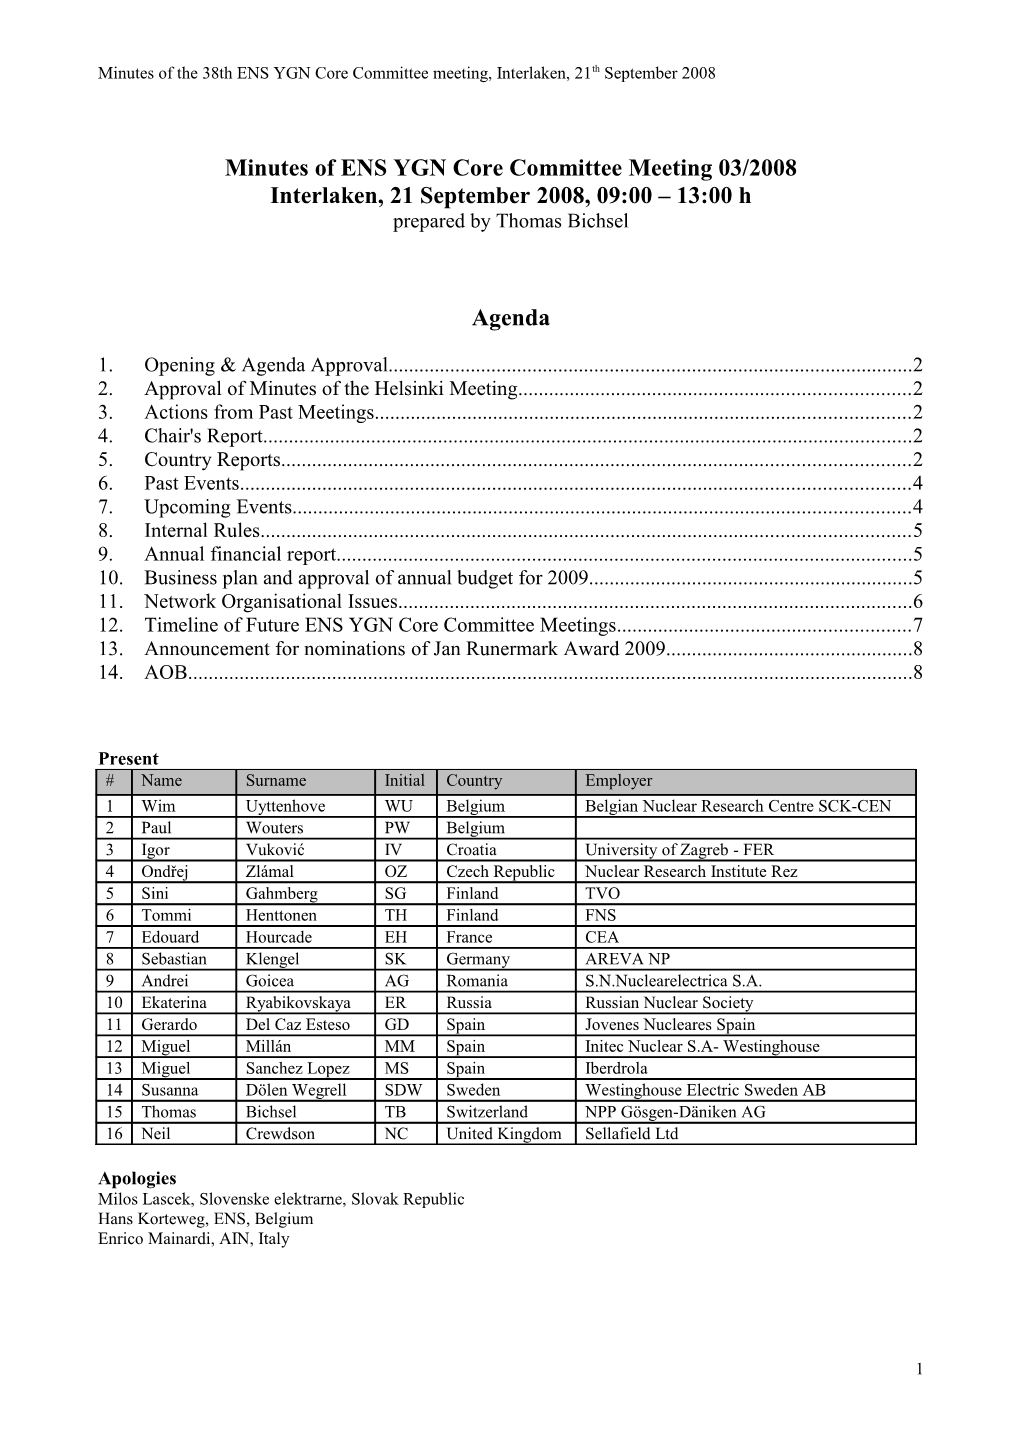 Minutes of ENS YGN Core Committee Meeting 03/2008